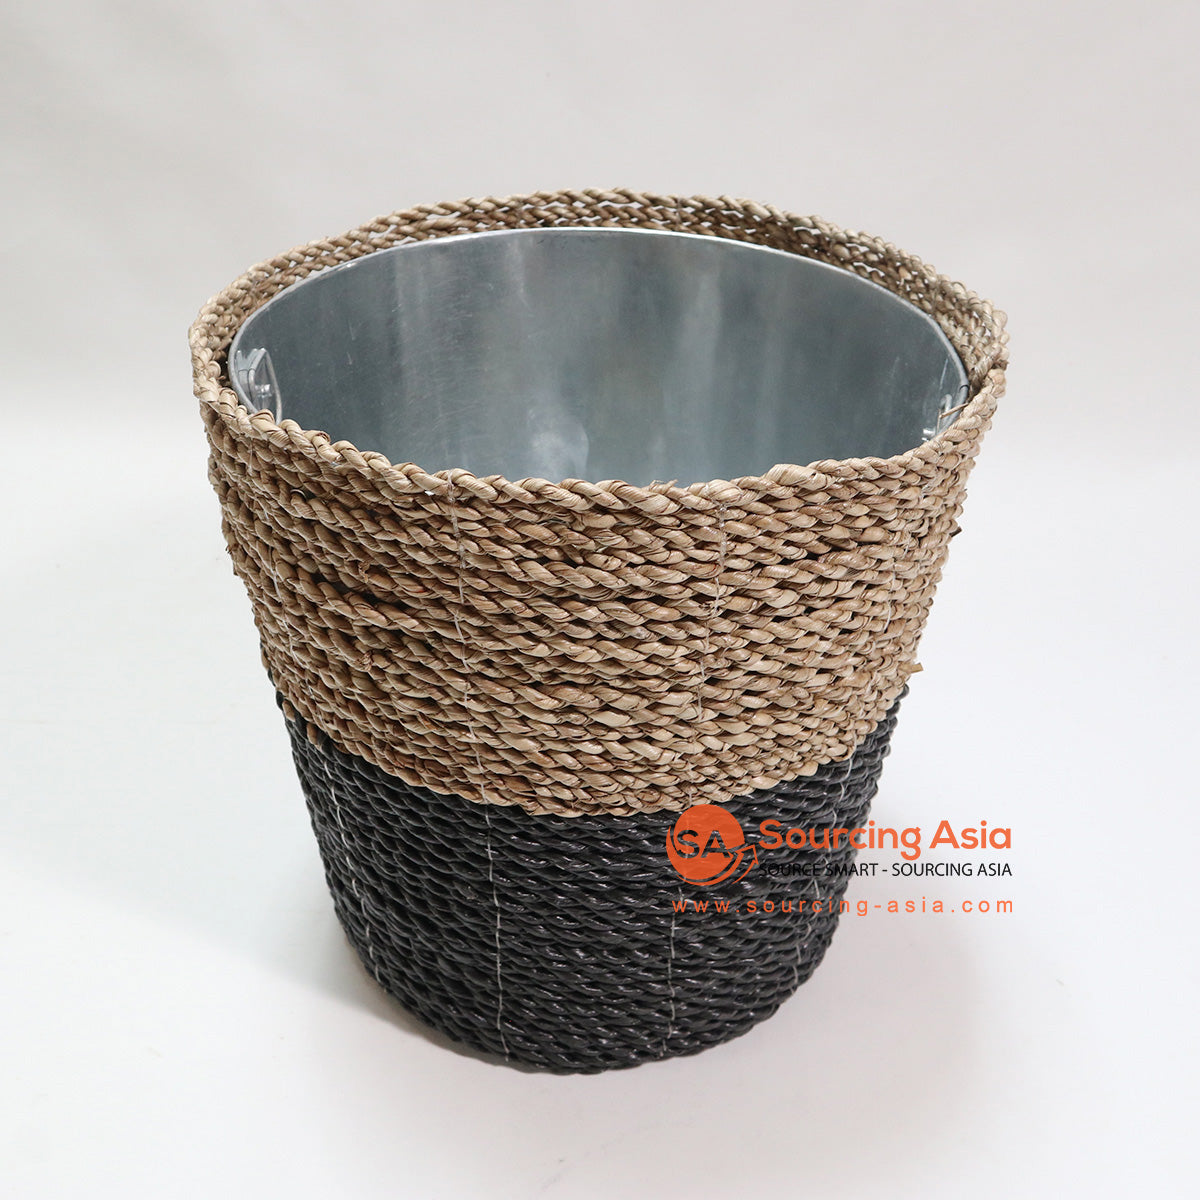 HBSC071 NATURAL AND BLACK SEAGRASS ROUND WASTE PAPER BASKET